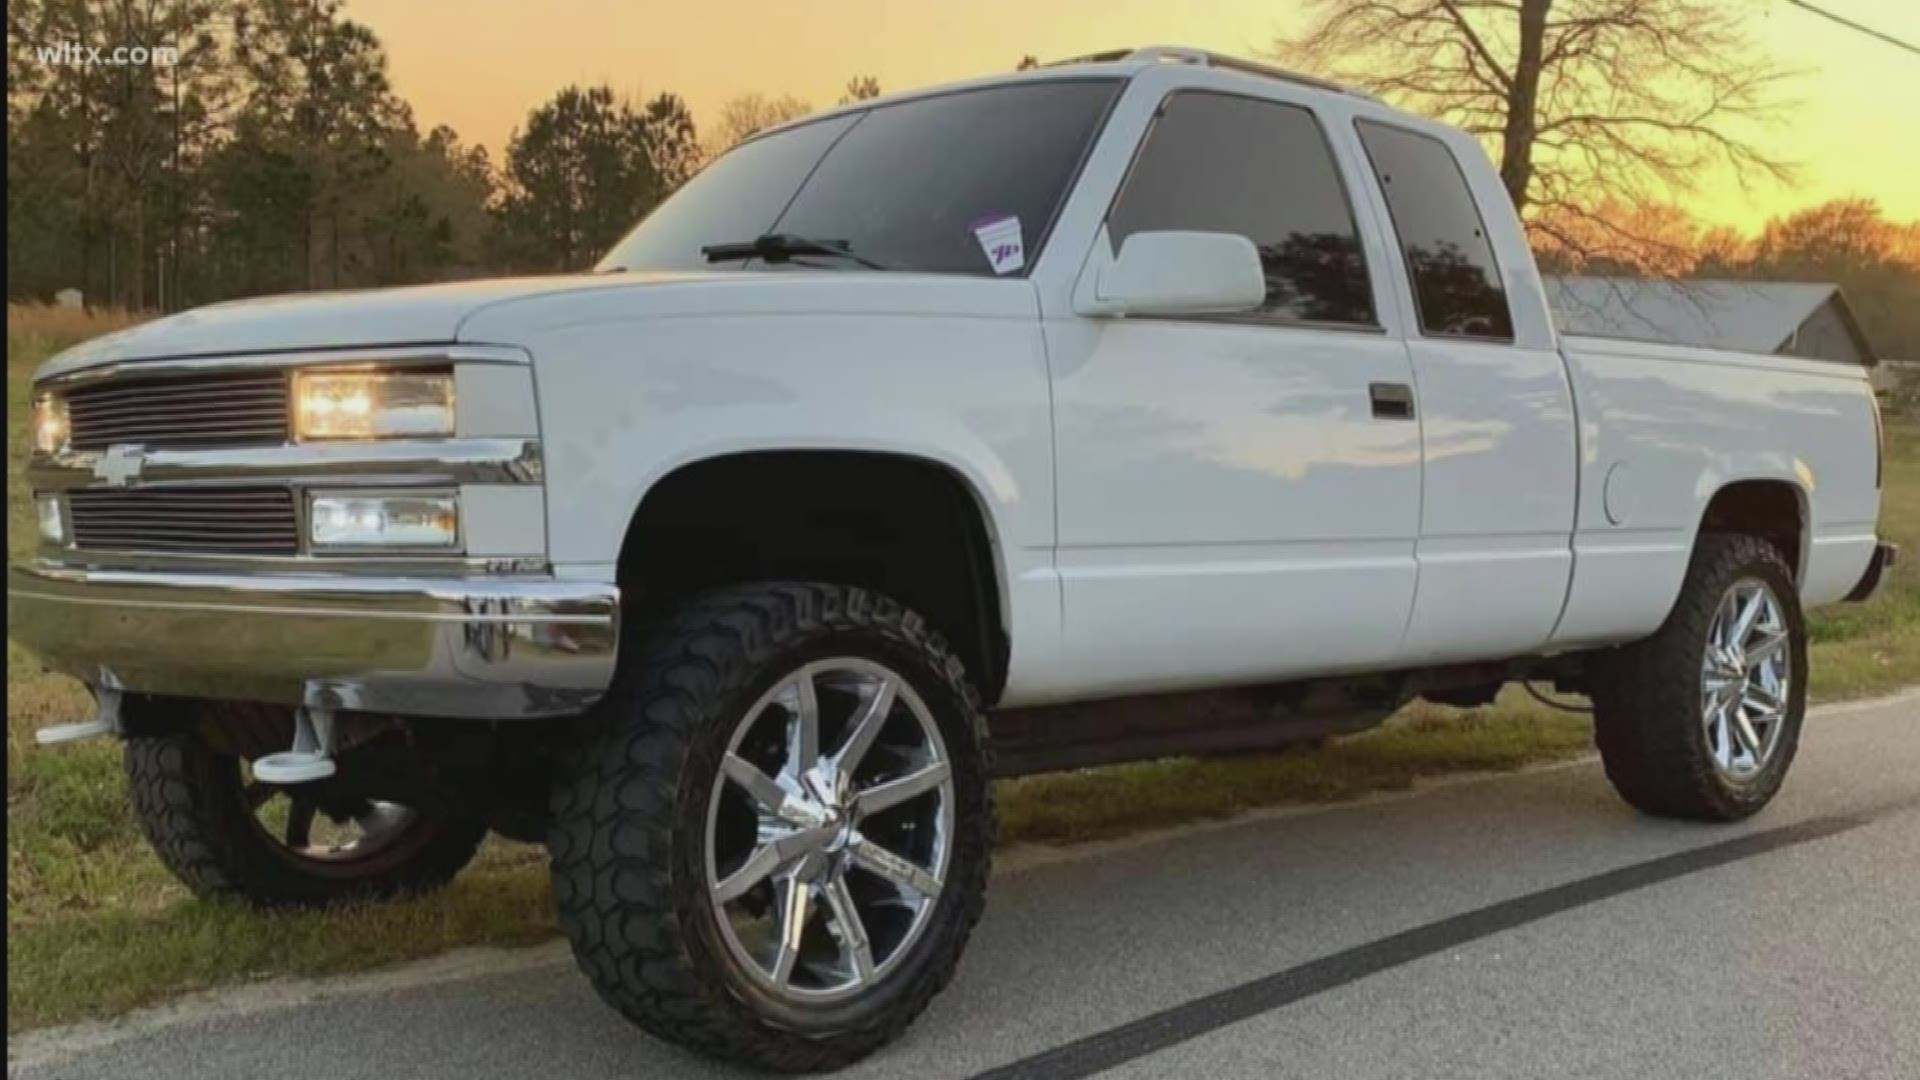 A Lugoff man is missing his truck after it was stolen from a McDonald's parking lot Tuesday morning.